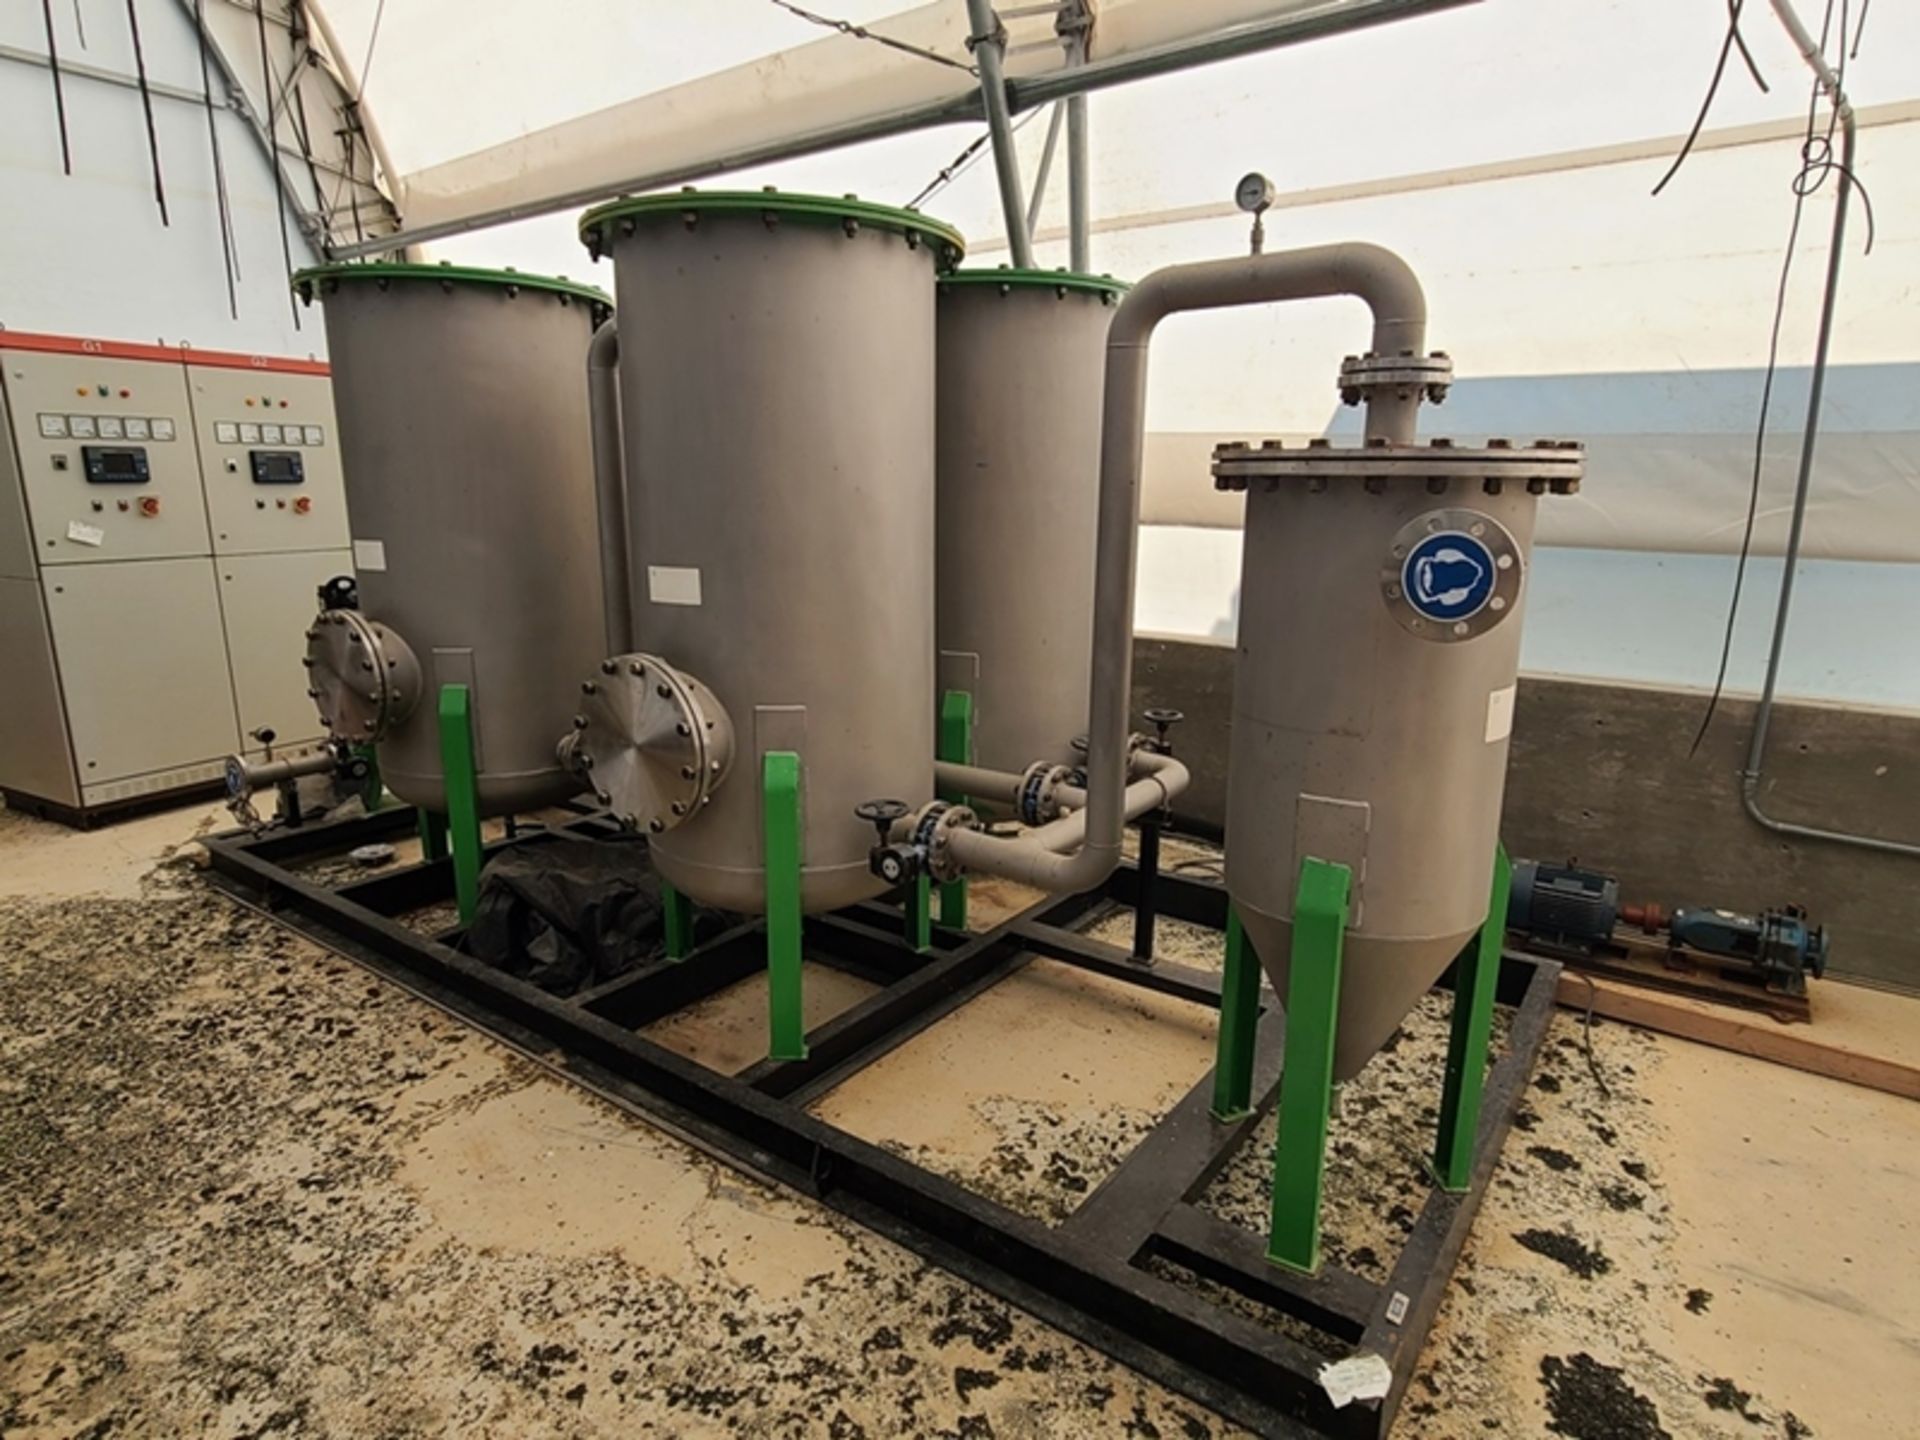 BIOMETHANE PRODUCTION EQUIPMENT - (2) CLEANBLUE BioFarma separation units with controls, (1) CLEANBL - Image 33 of 34